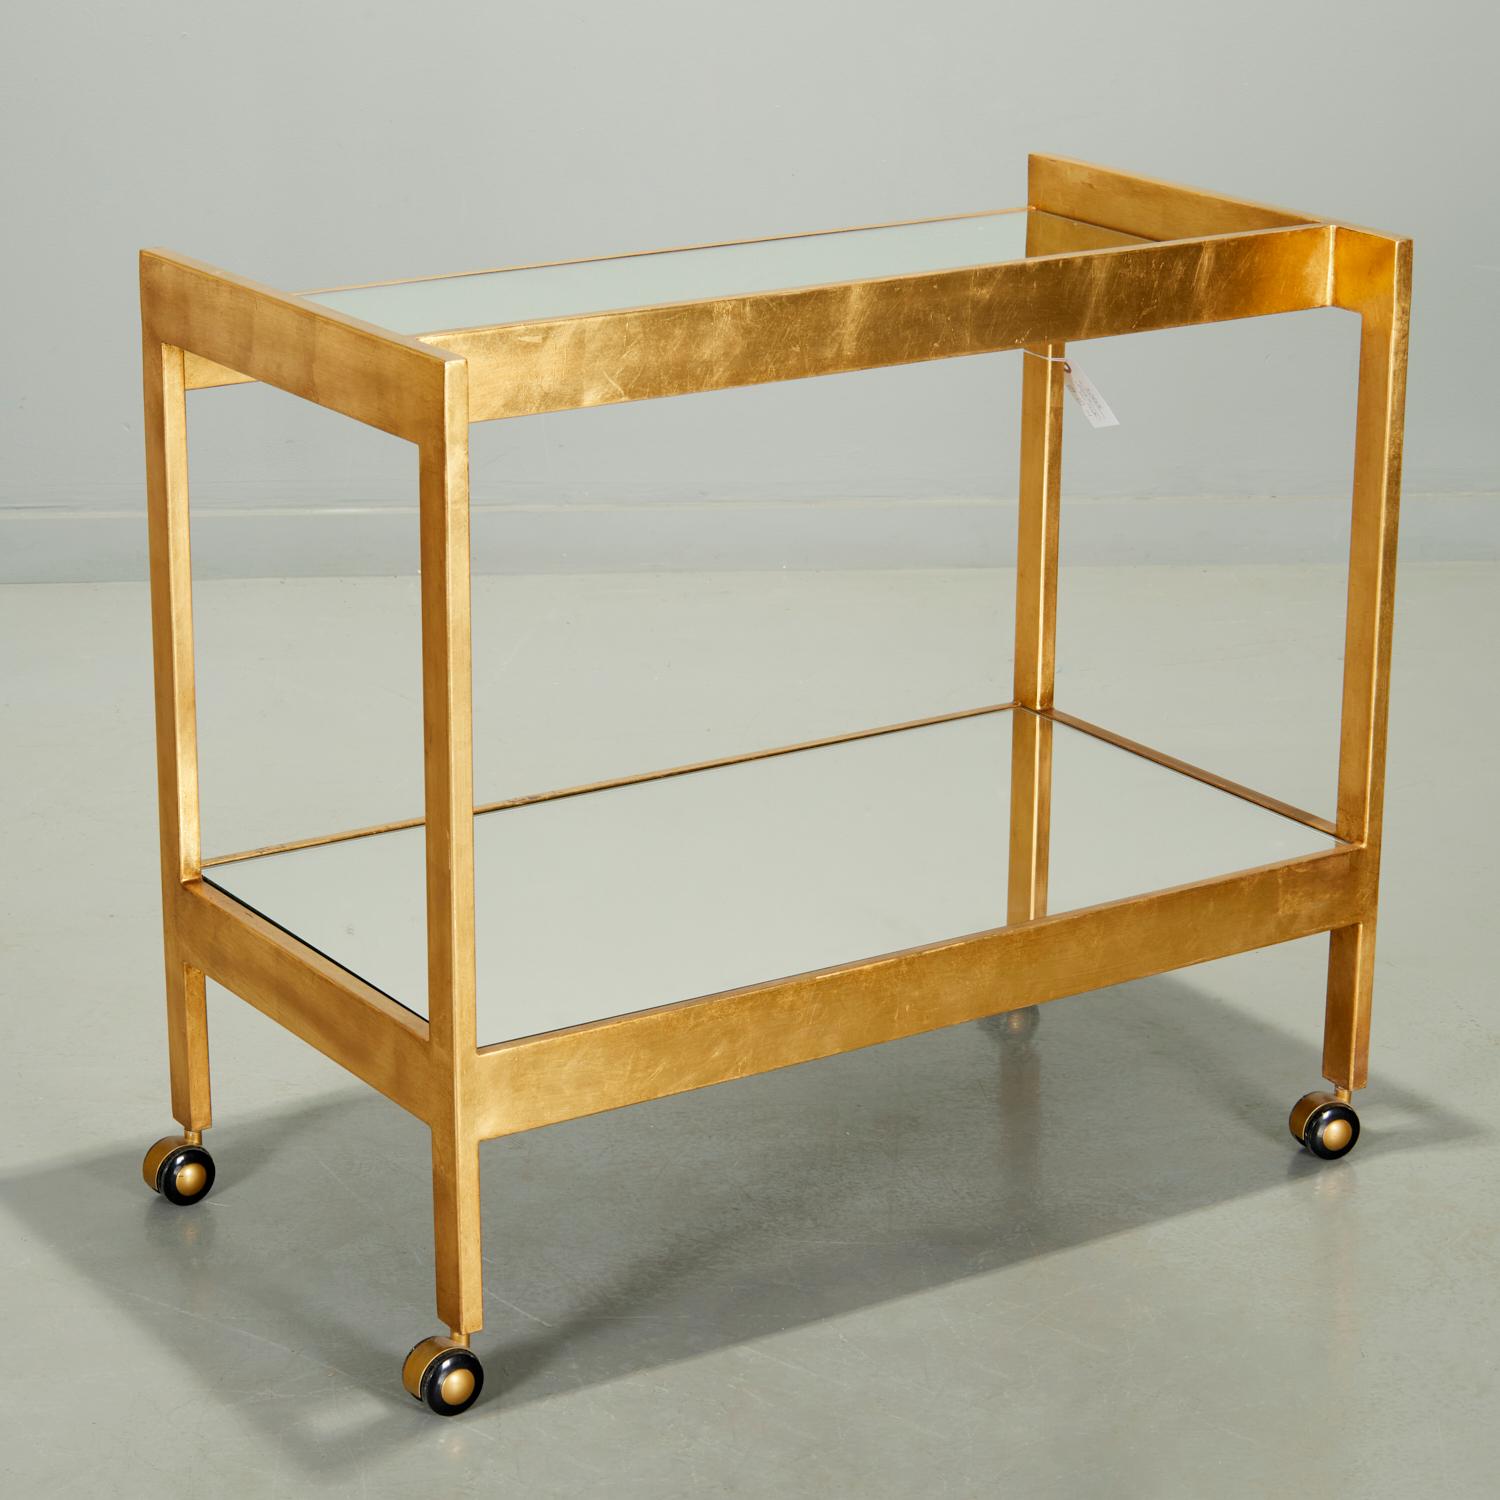 Contemporary Gold Leaf Bar Cart With Two Mirrored Shelves In Good Condition For Sale In Morristown, NJ